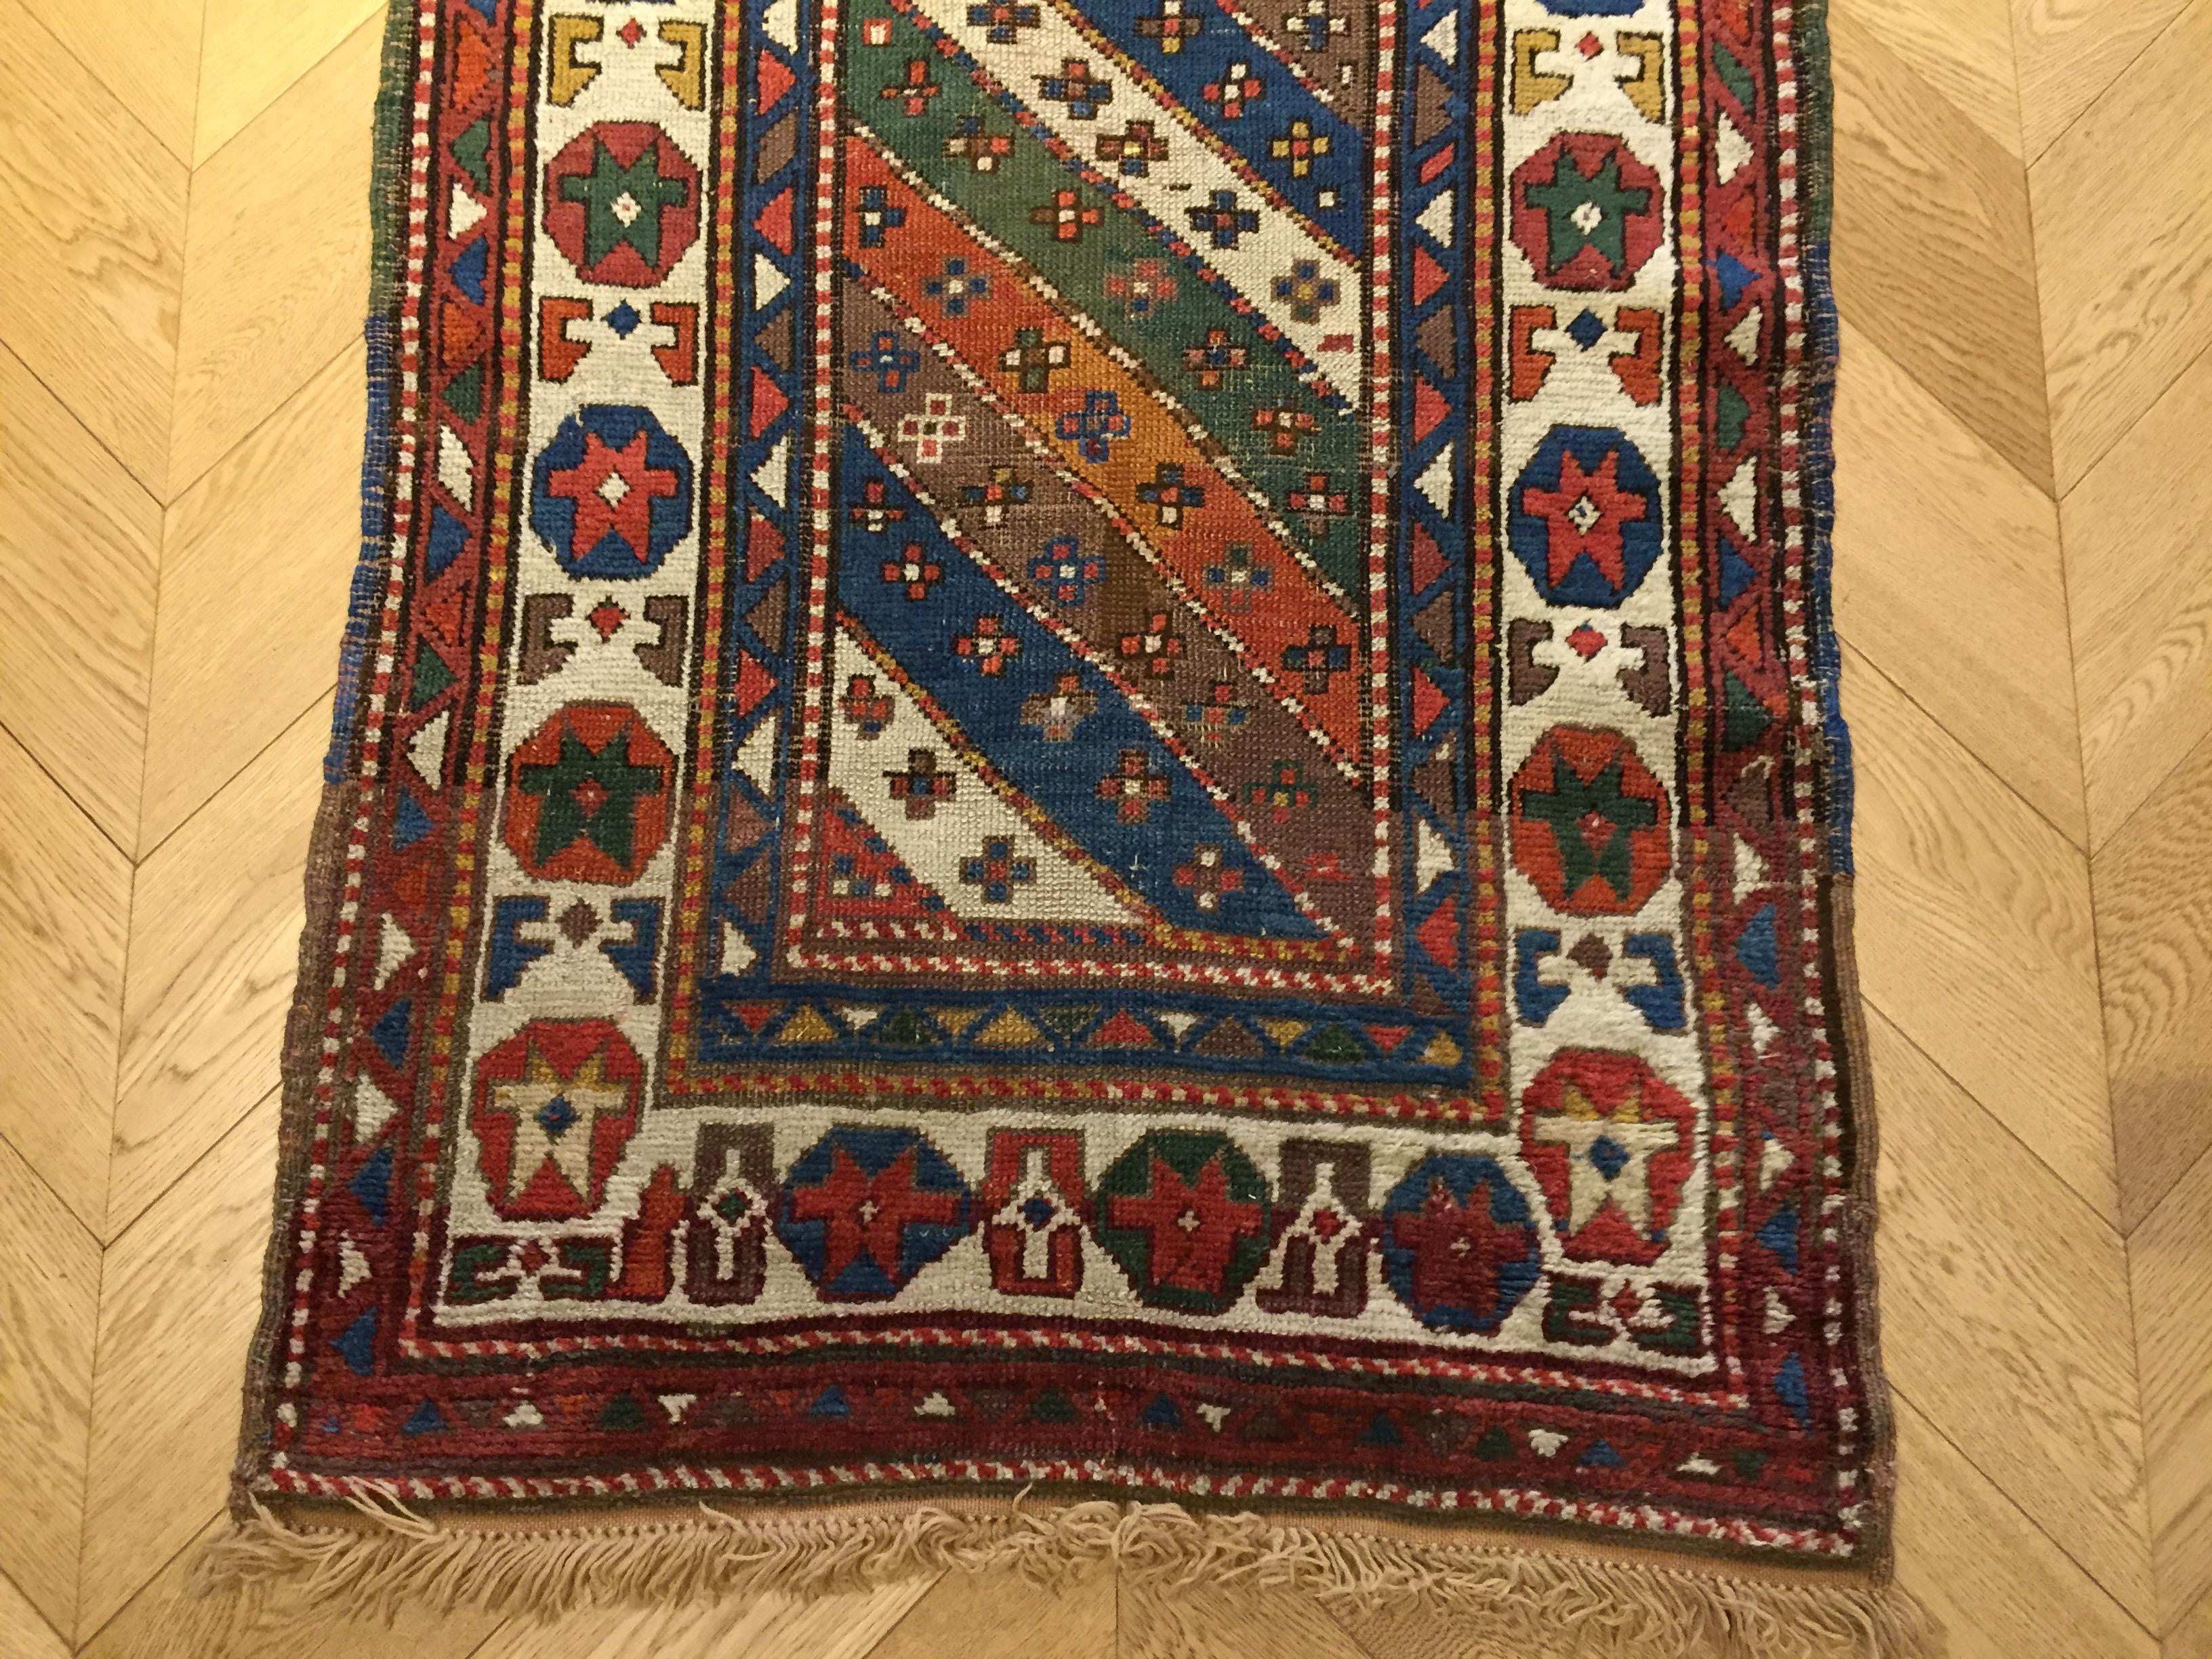 Early 20th century, Central Caucasus, wool fleece on woolen armor.
The region of Ghendje is located in the middle of the Caucasus, the carpets traded in Ghendje come from the vast surroundings and do not have a specific unit type. Wool is elastic